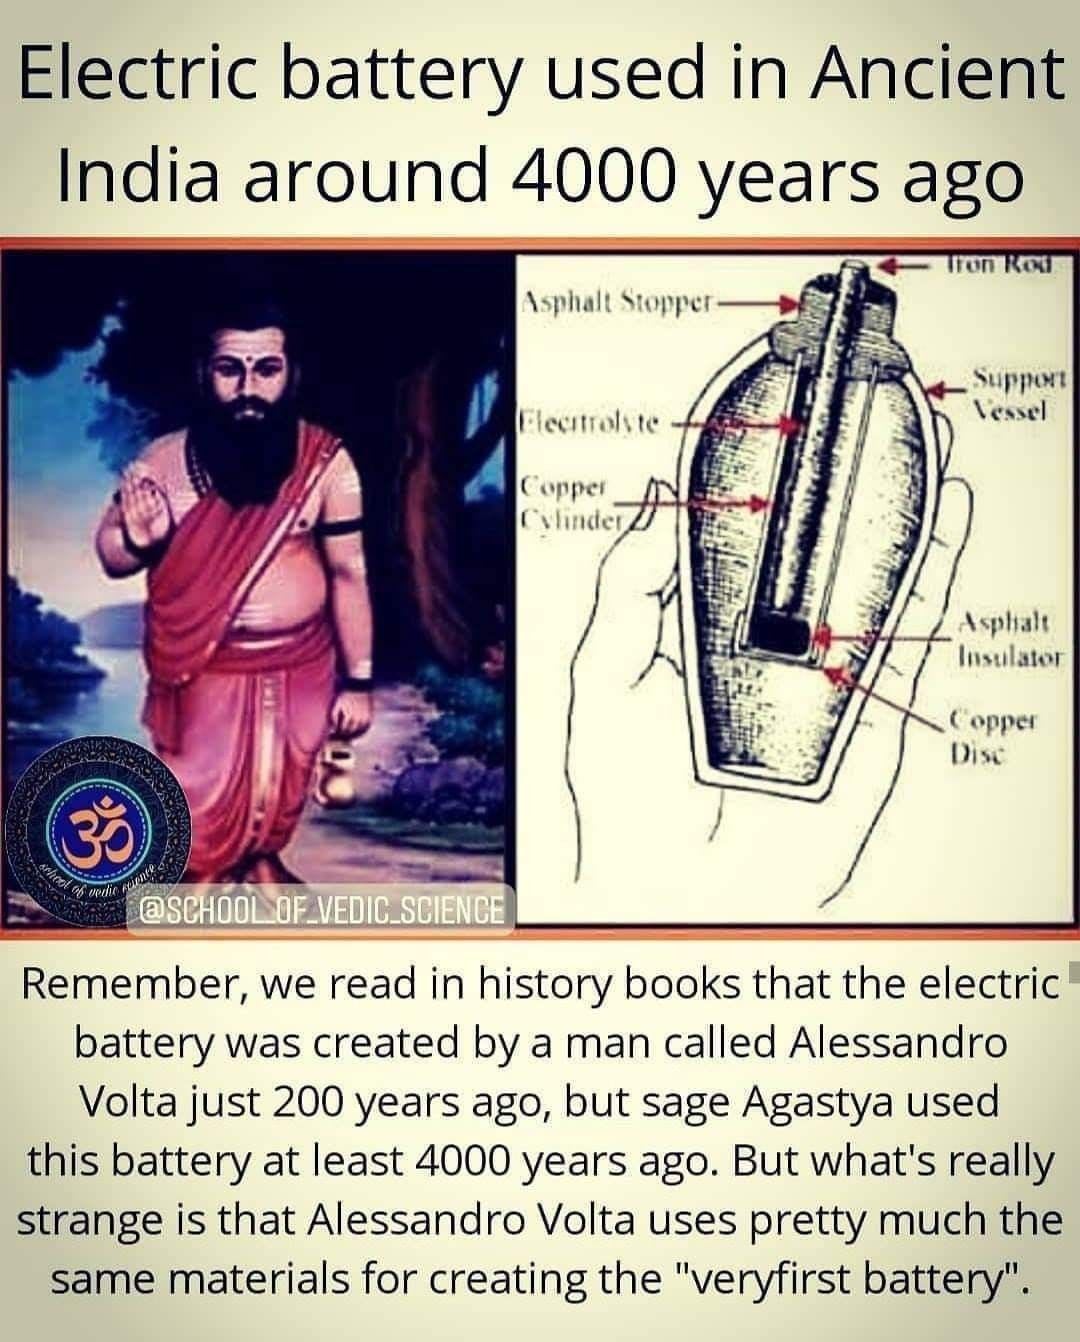 Pin by Nicole Bushman on Vedic Venkat | Indian history facts, Cool science facts, Interesting facts about world